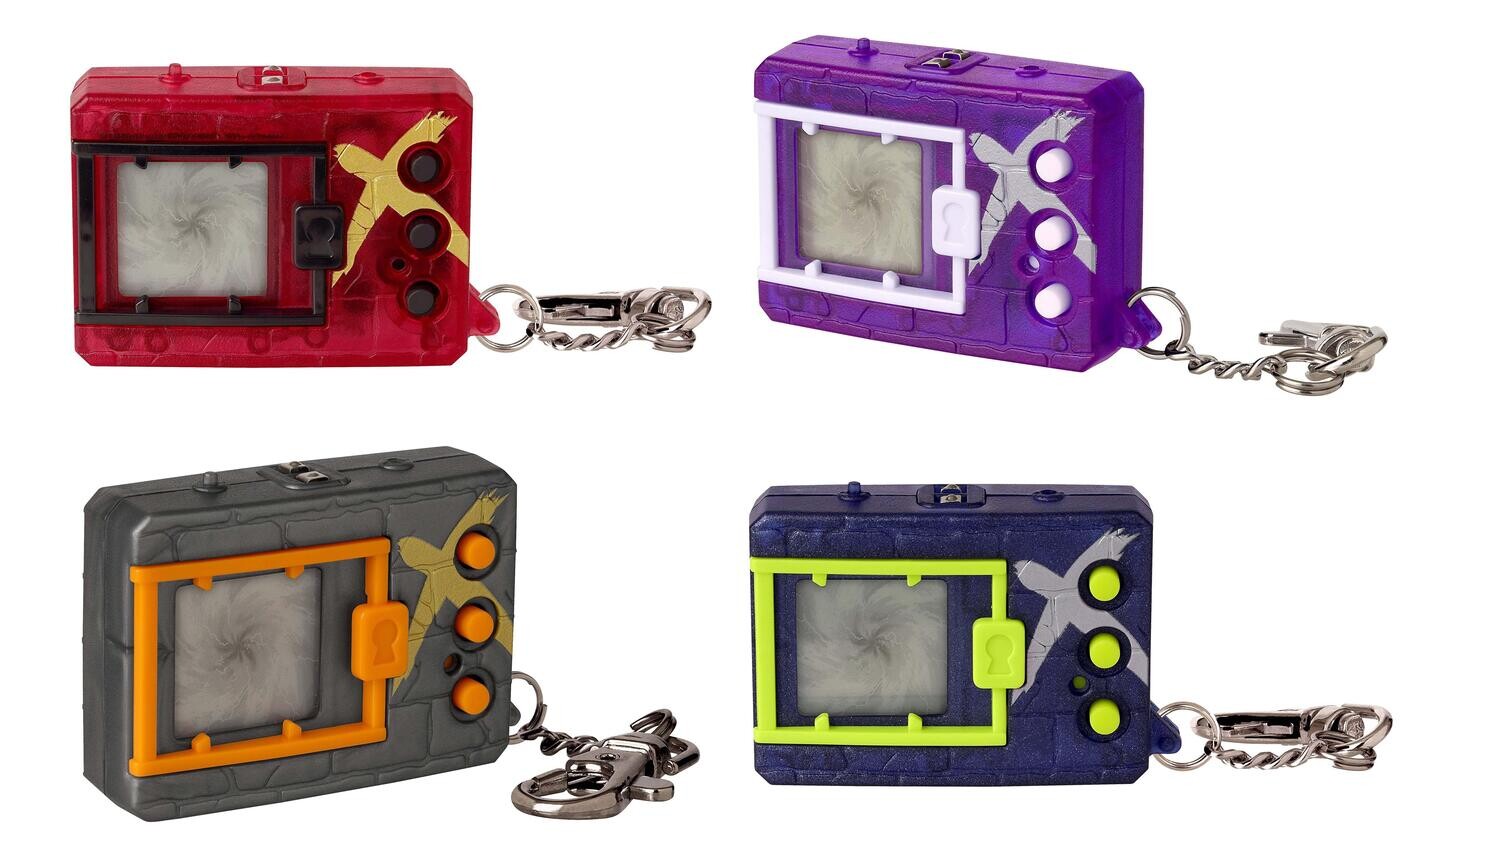 Digimon X Digivice Complete set of 4